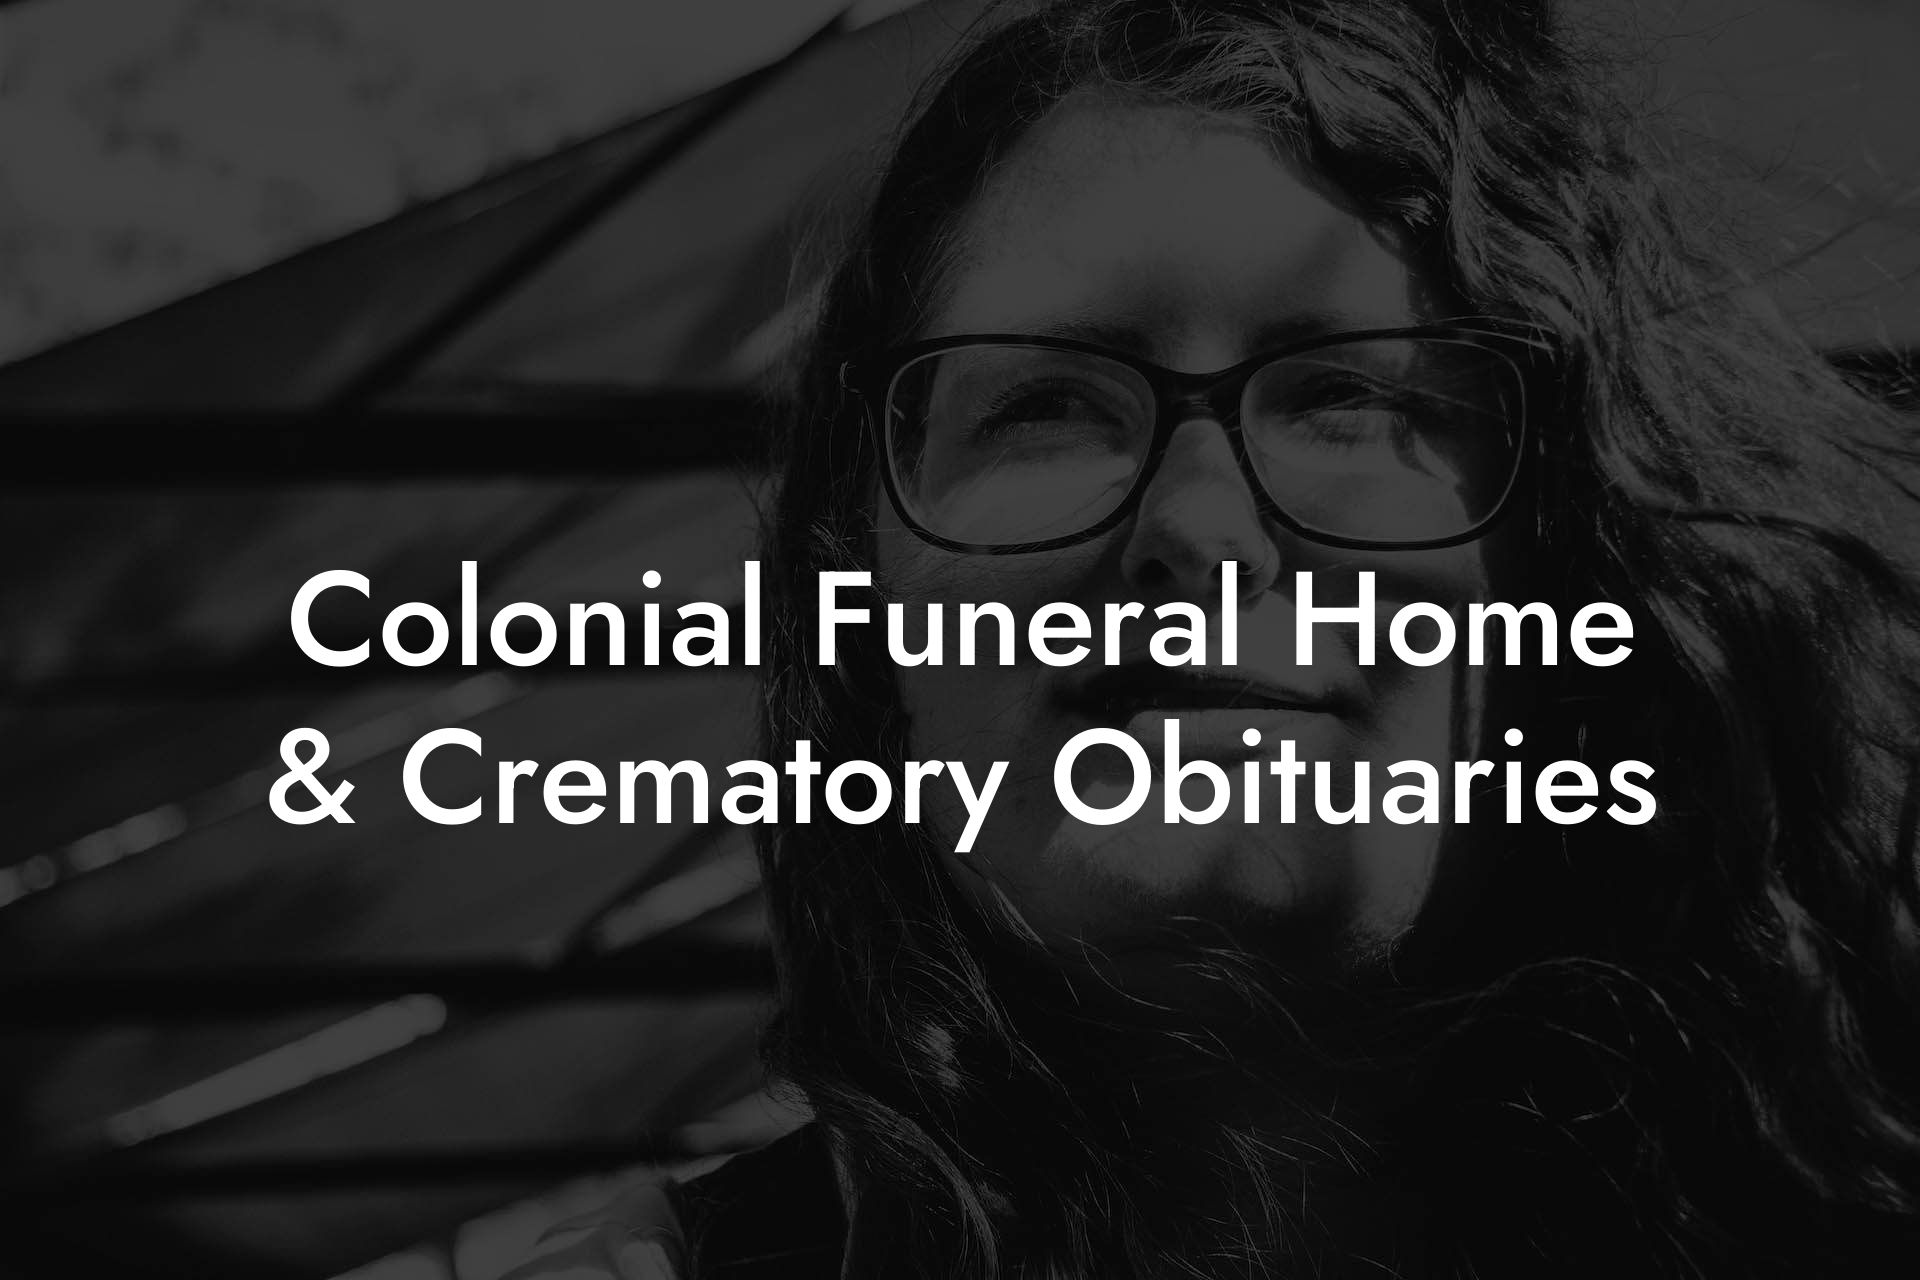 Colonial Funeral Home & Crematory Obituaries